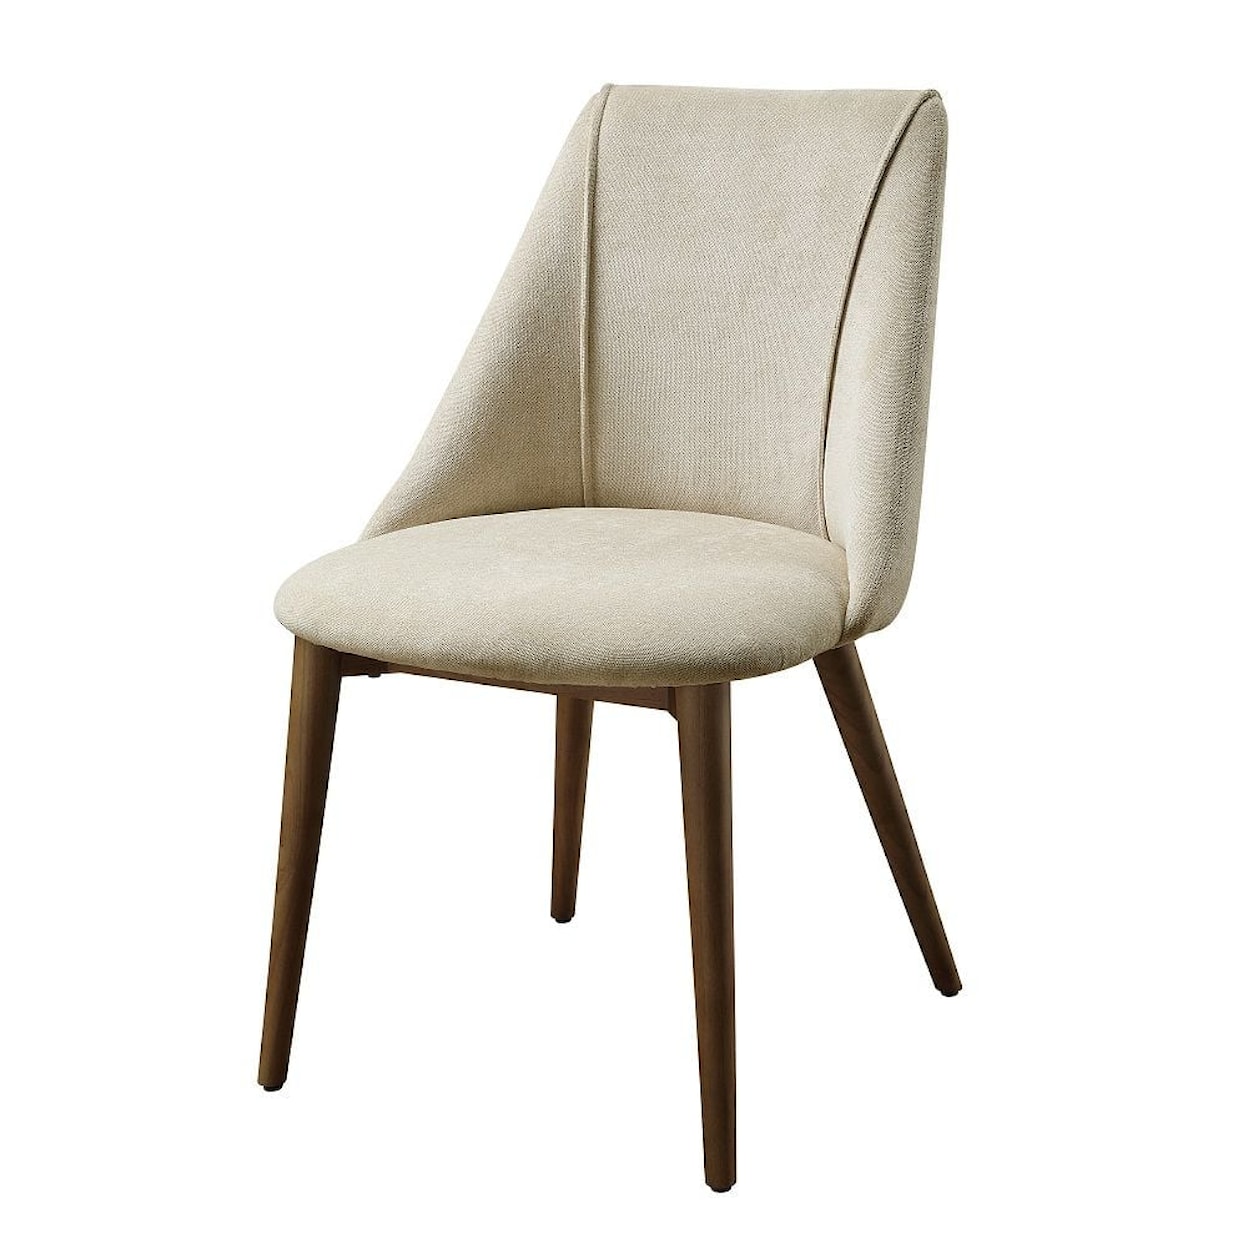 Acme Furniture Willene Dining Side Chair